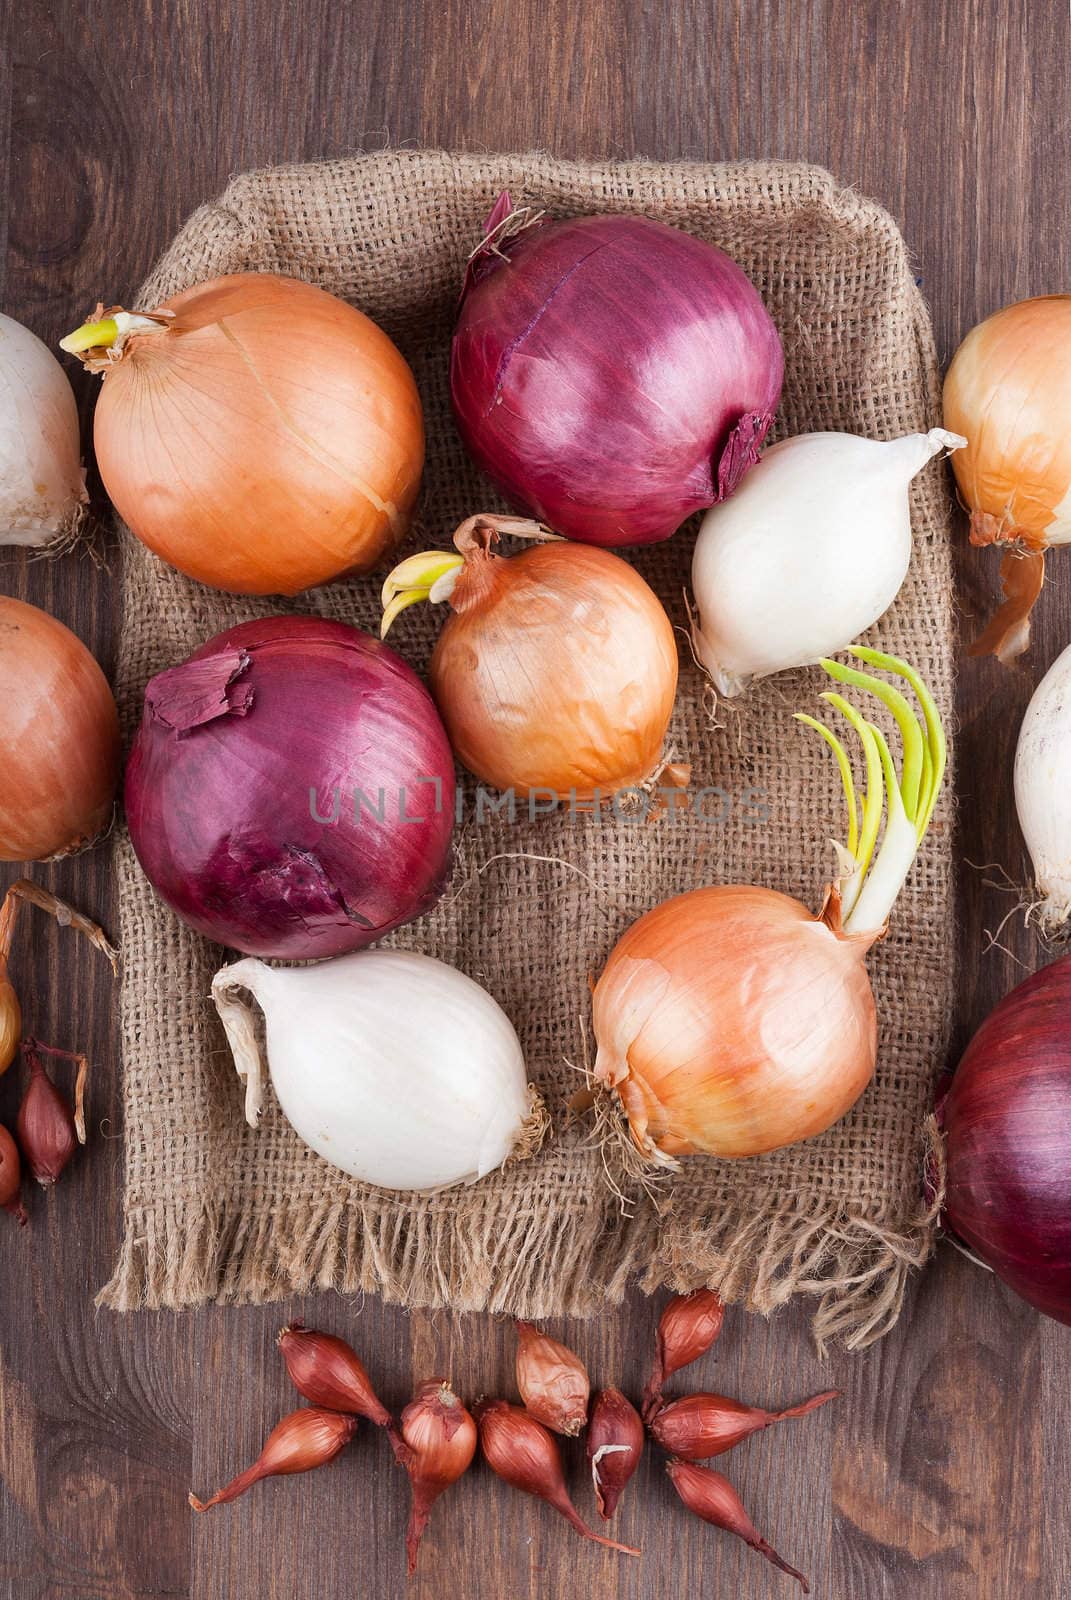 Different varieties of onions on a kitchen board and bagging